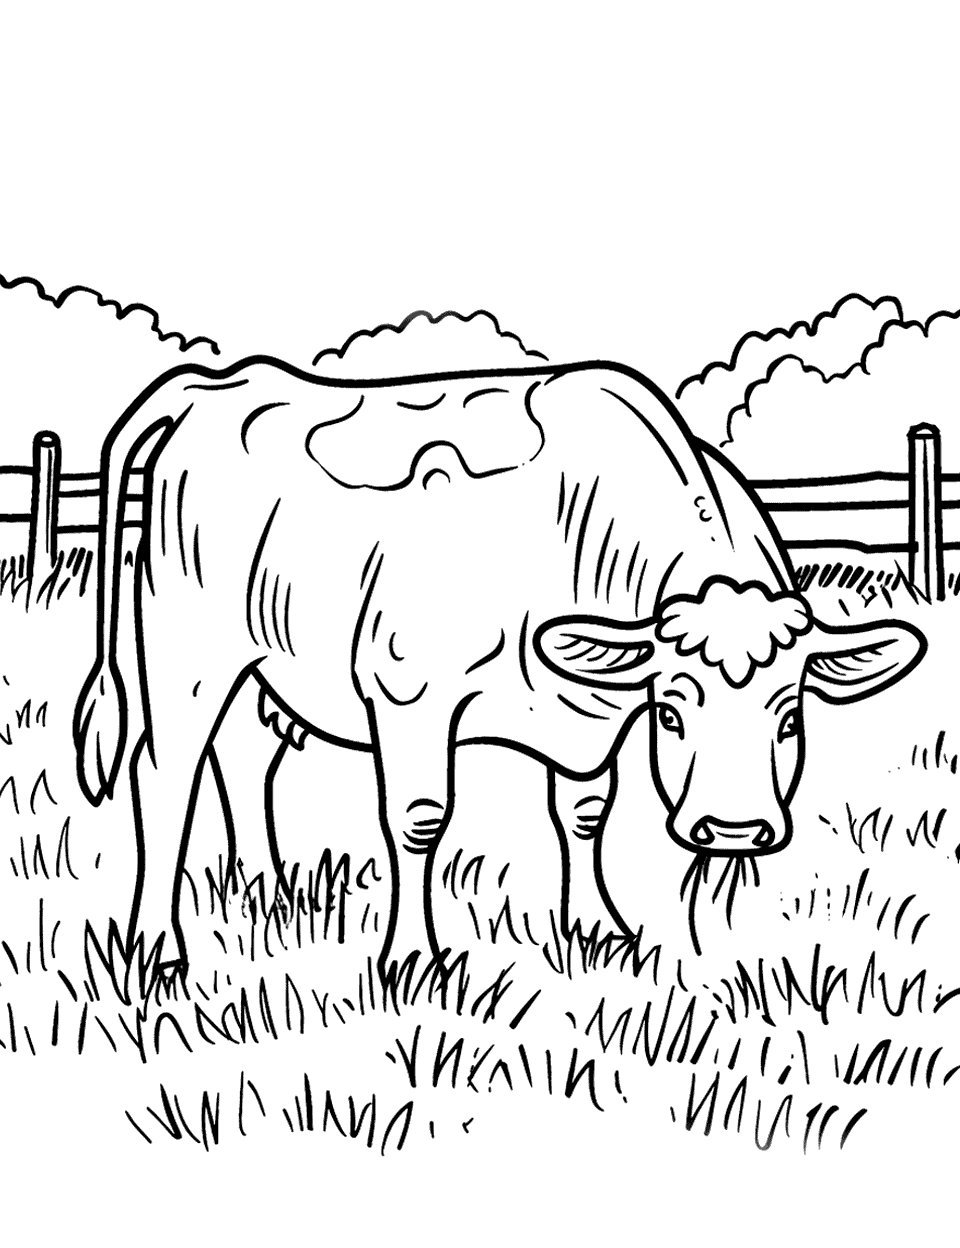 Cow Grazing in a Field Farm Animal Coloring Page - A single cow peacefully eating grass in an open field with a simple fence in the background.